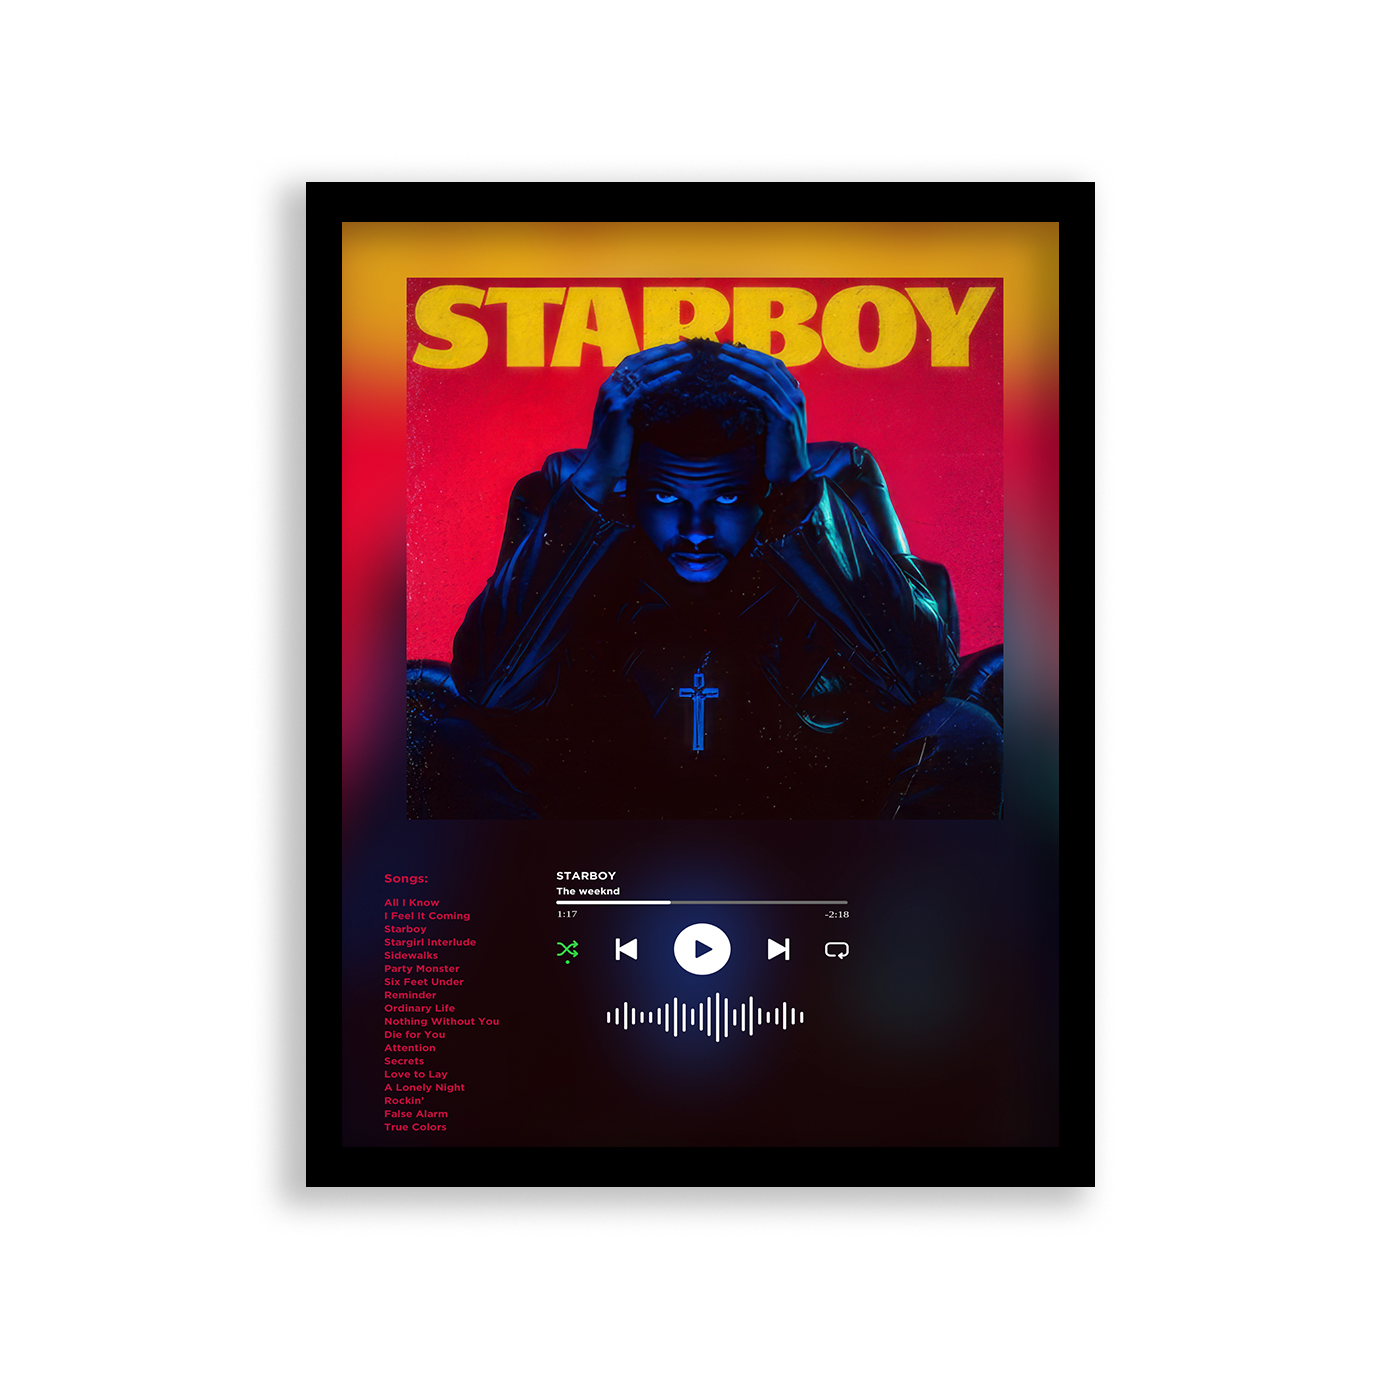 Plakat The Weeknd "Starboy"